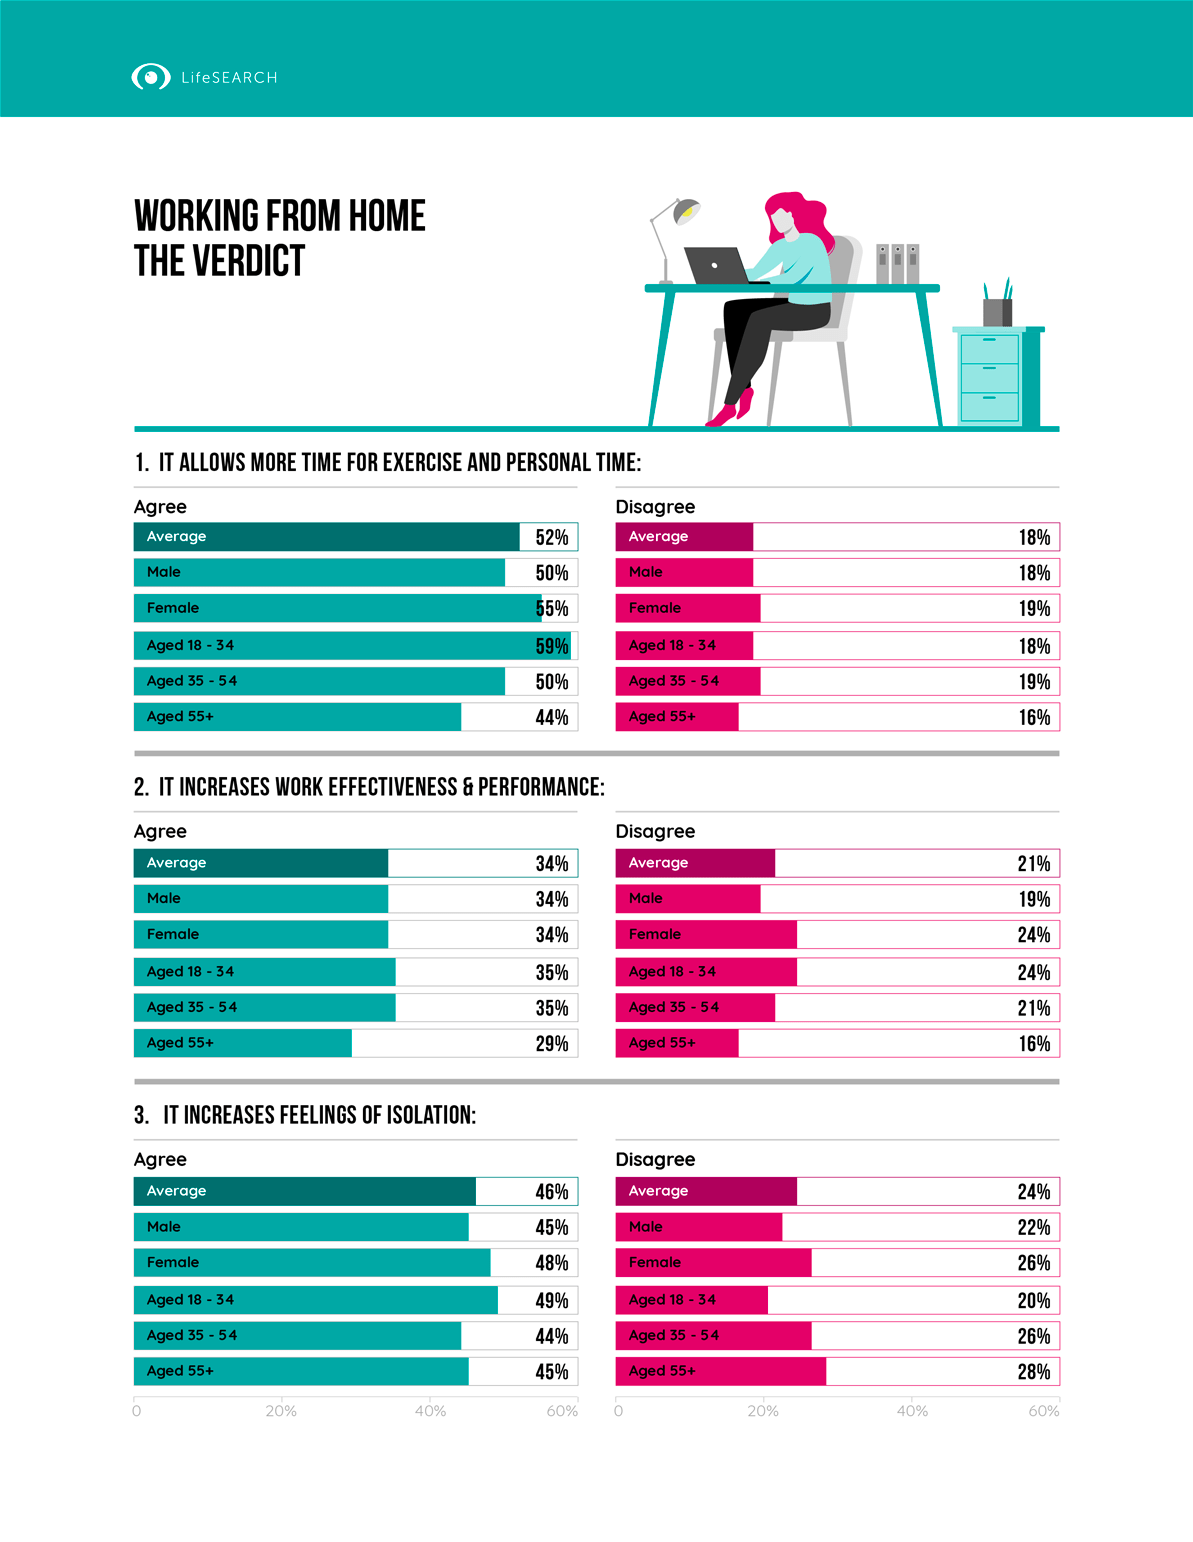 Working from home - the verdict on personal time, exercise, work effectiveness, performance & isolation